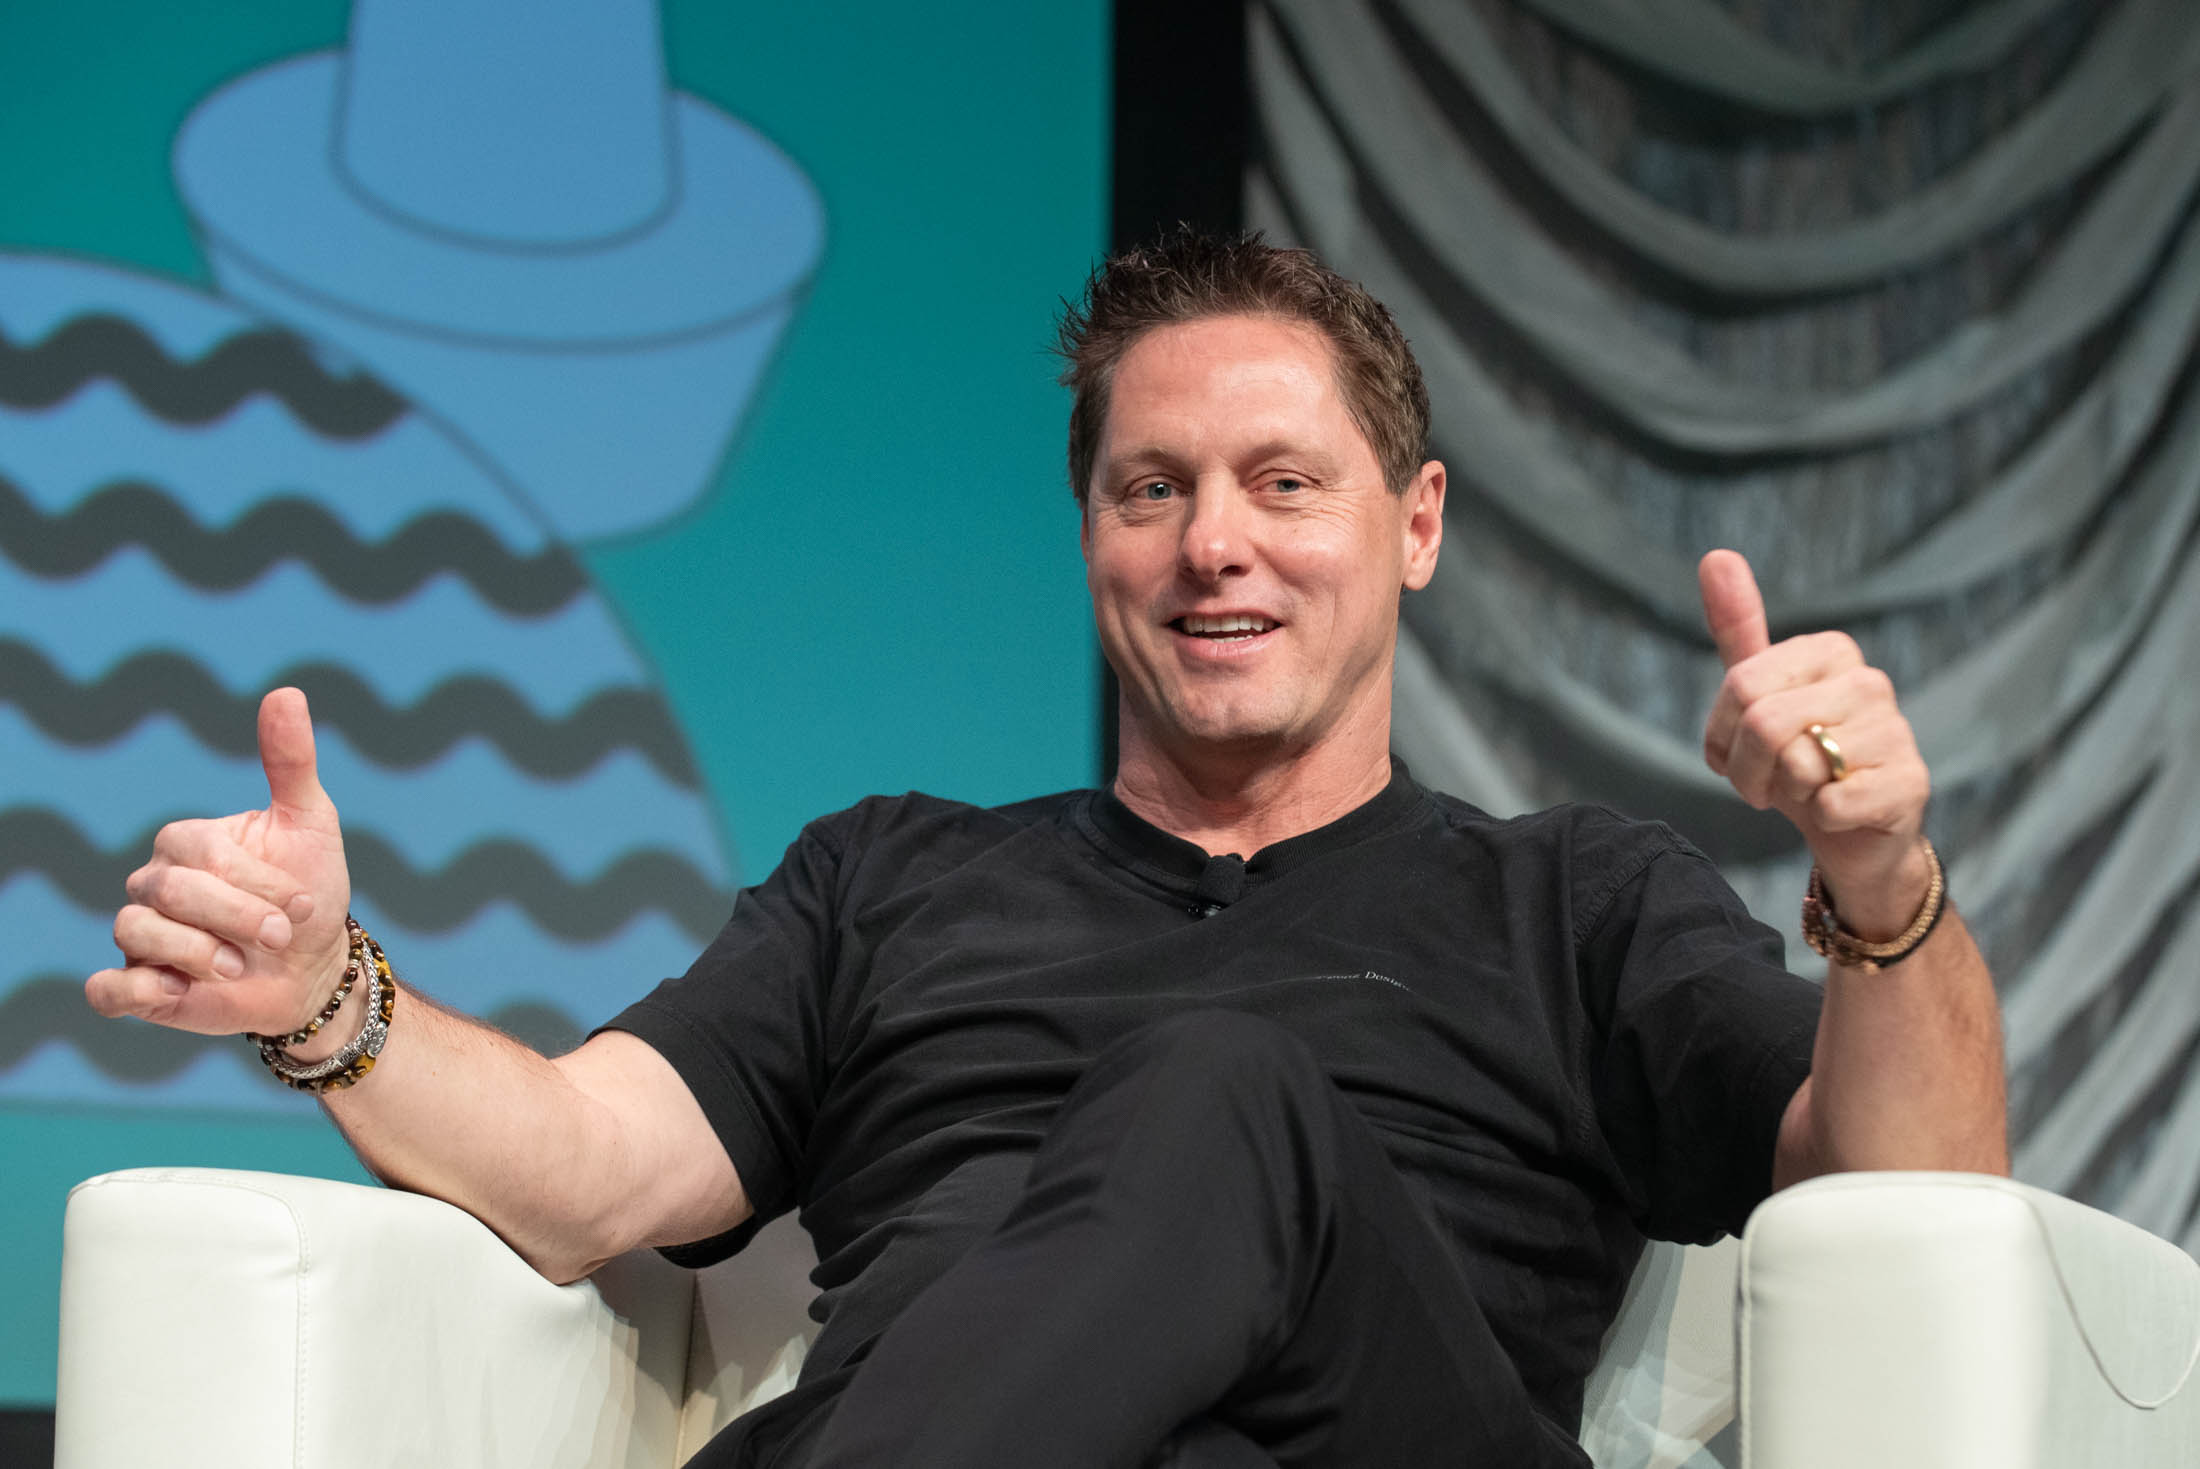 Gorden Wagener, Daimler AG’s&nbsp;chief design officer, gestures during the 2019 SXSW Conference and Festival in Austin.